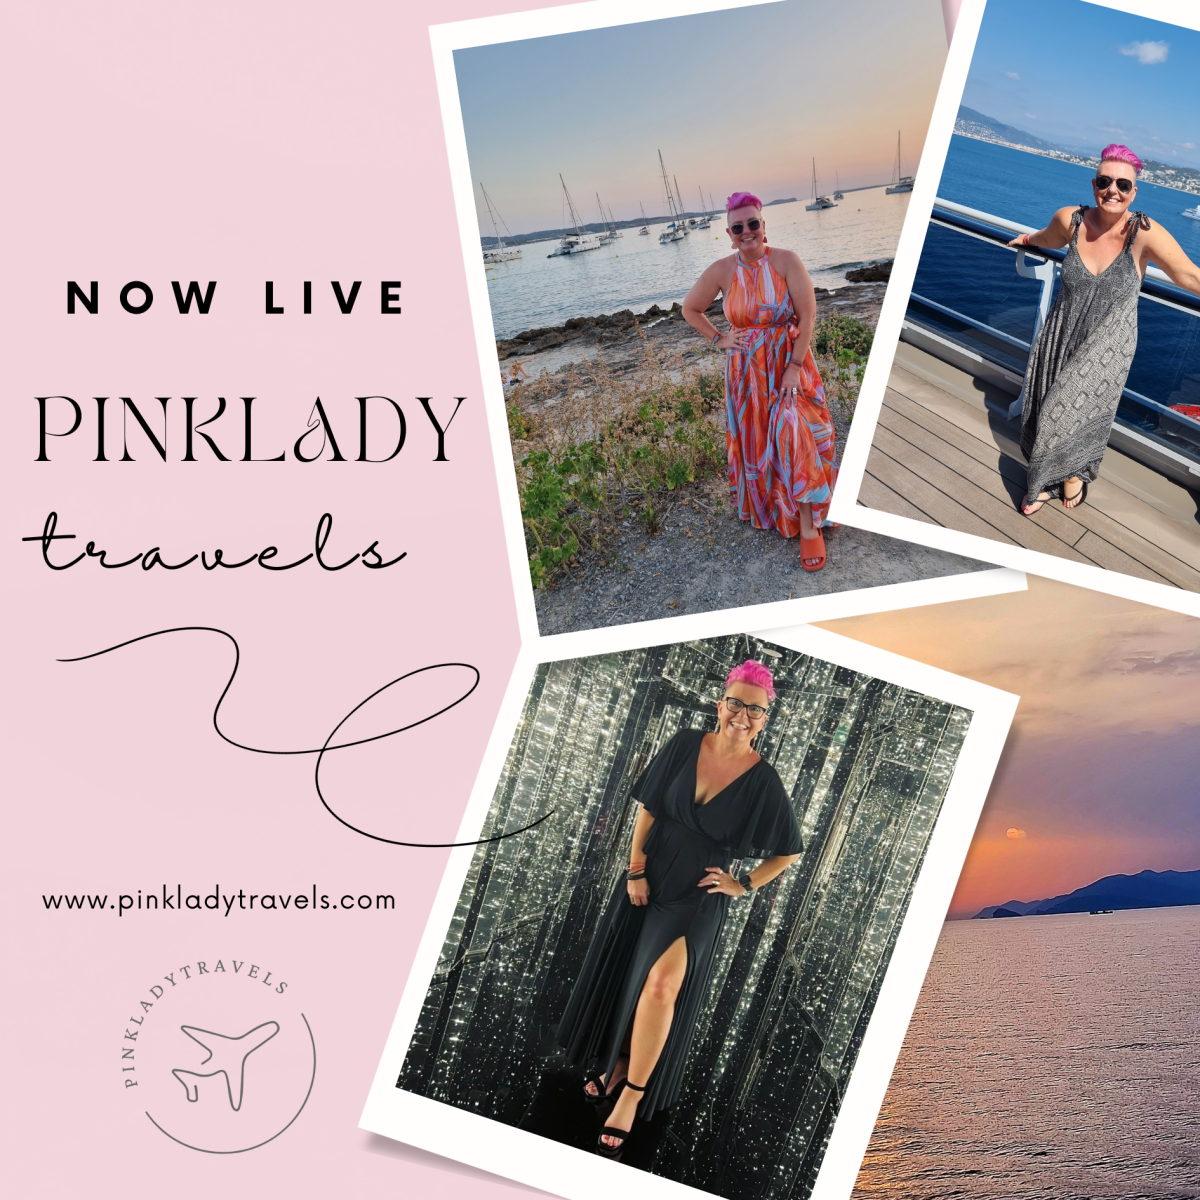 Pink Lady Travels - now live